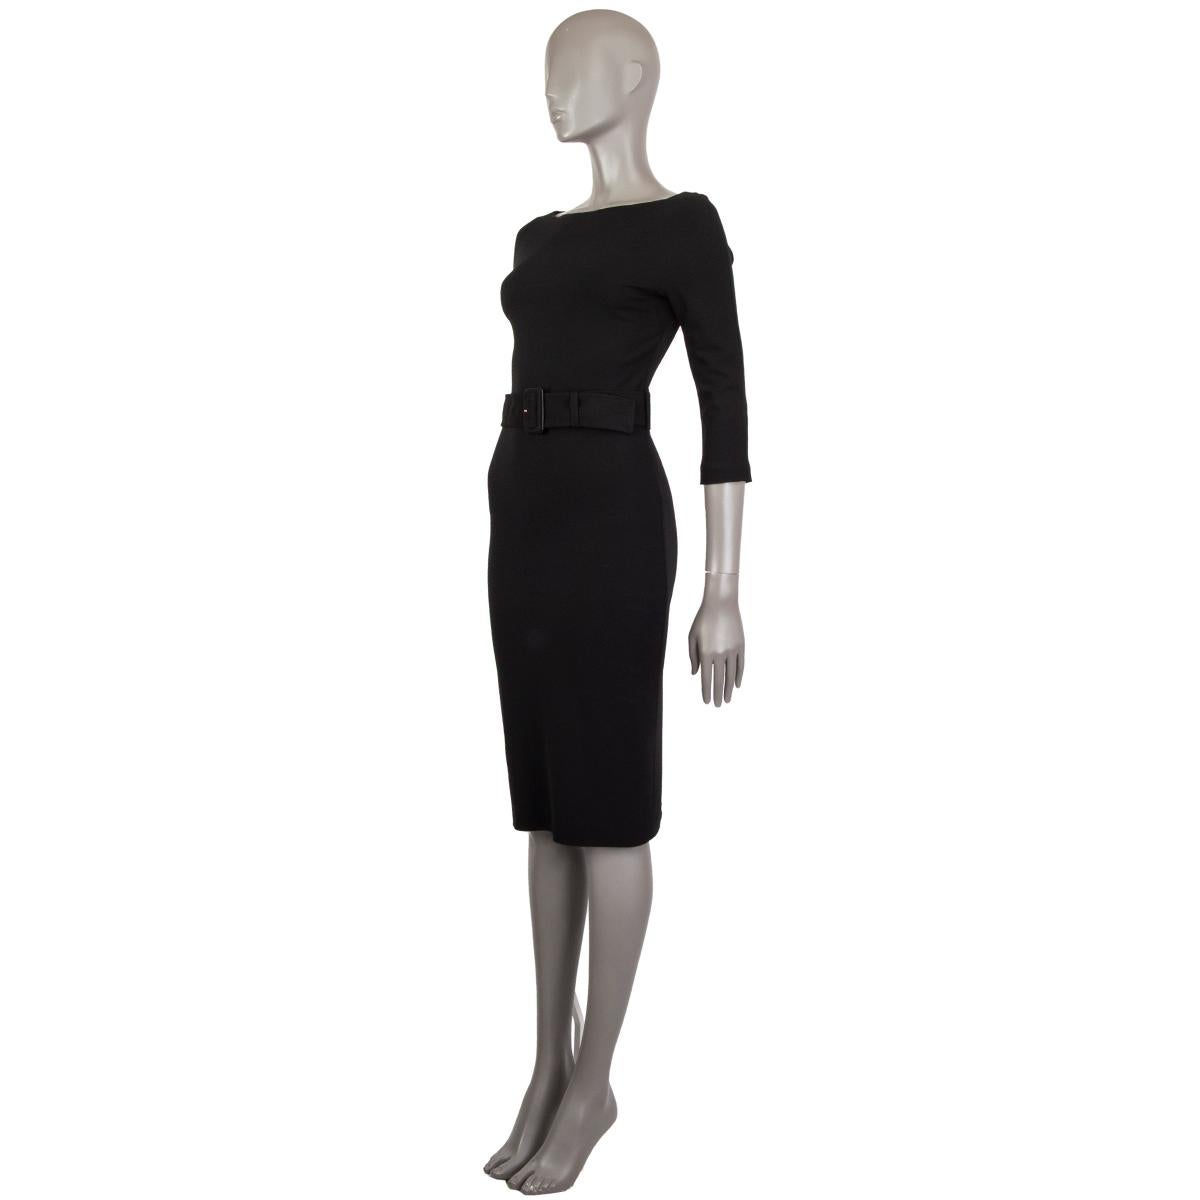 Gucci classic belted sheath dress in black missing tag probably (viscose blend) with a buckle belt at the waist, elegant fitted silhouette, boat neckline, 3/4 sleeve length, elastic fabric. Closes with a concealed zipper in the back. Lined in black